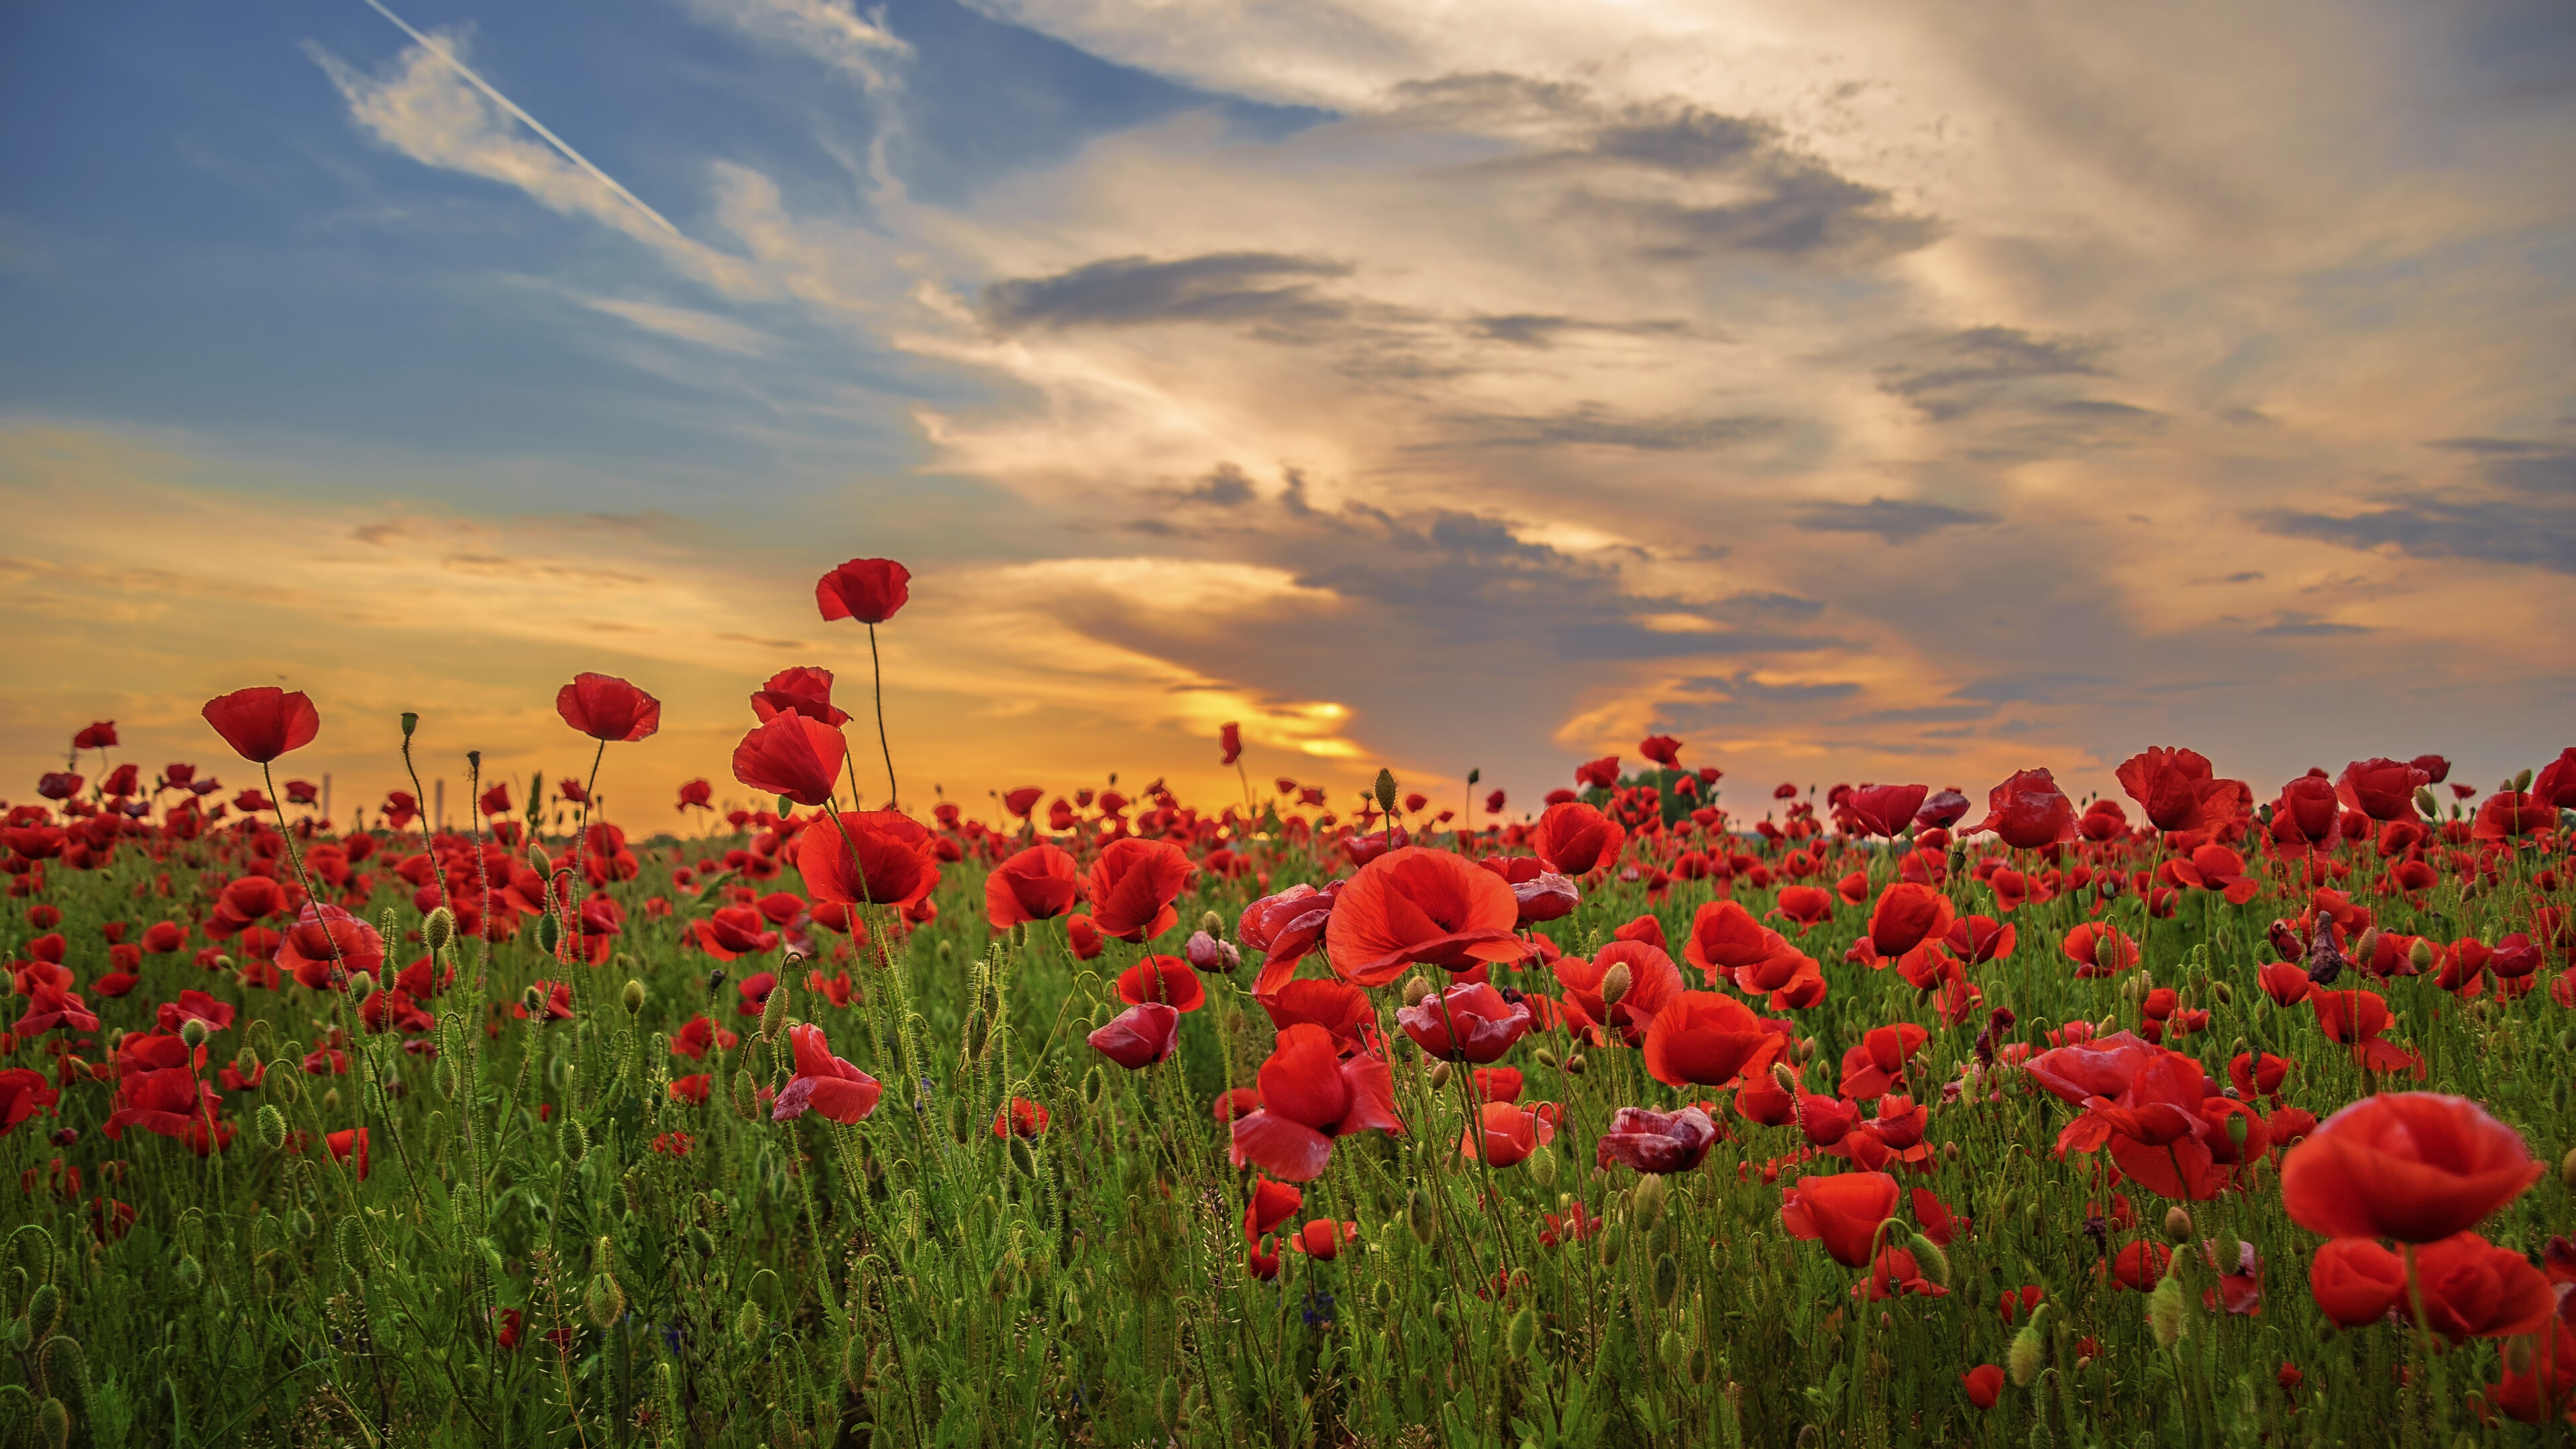 Poppy Flower: Poppies can be over a metre tall with flowers up to 15 centimetres across. 3840x2160 4K Wallpaper.